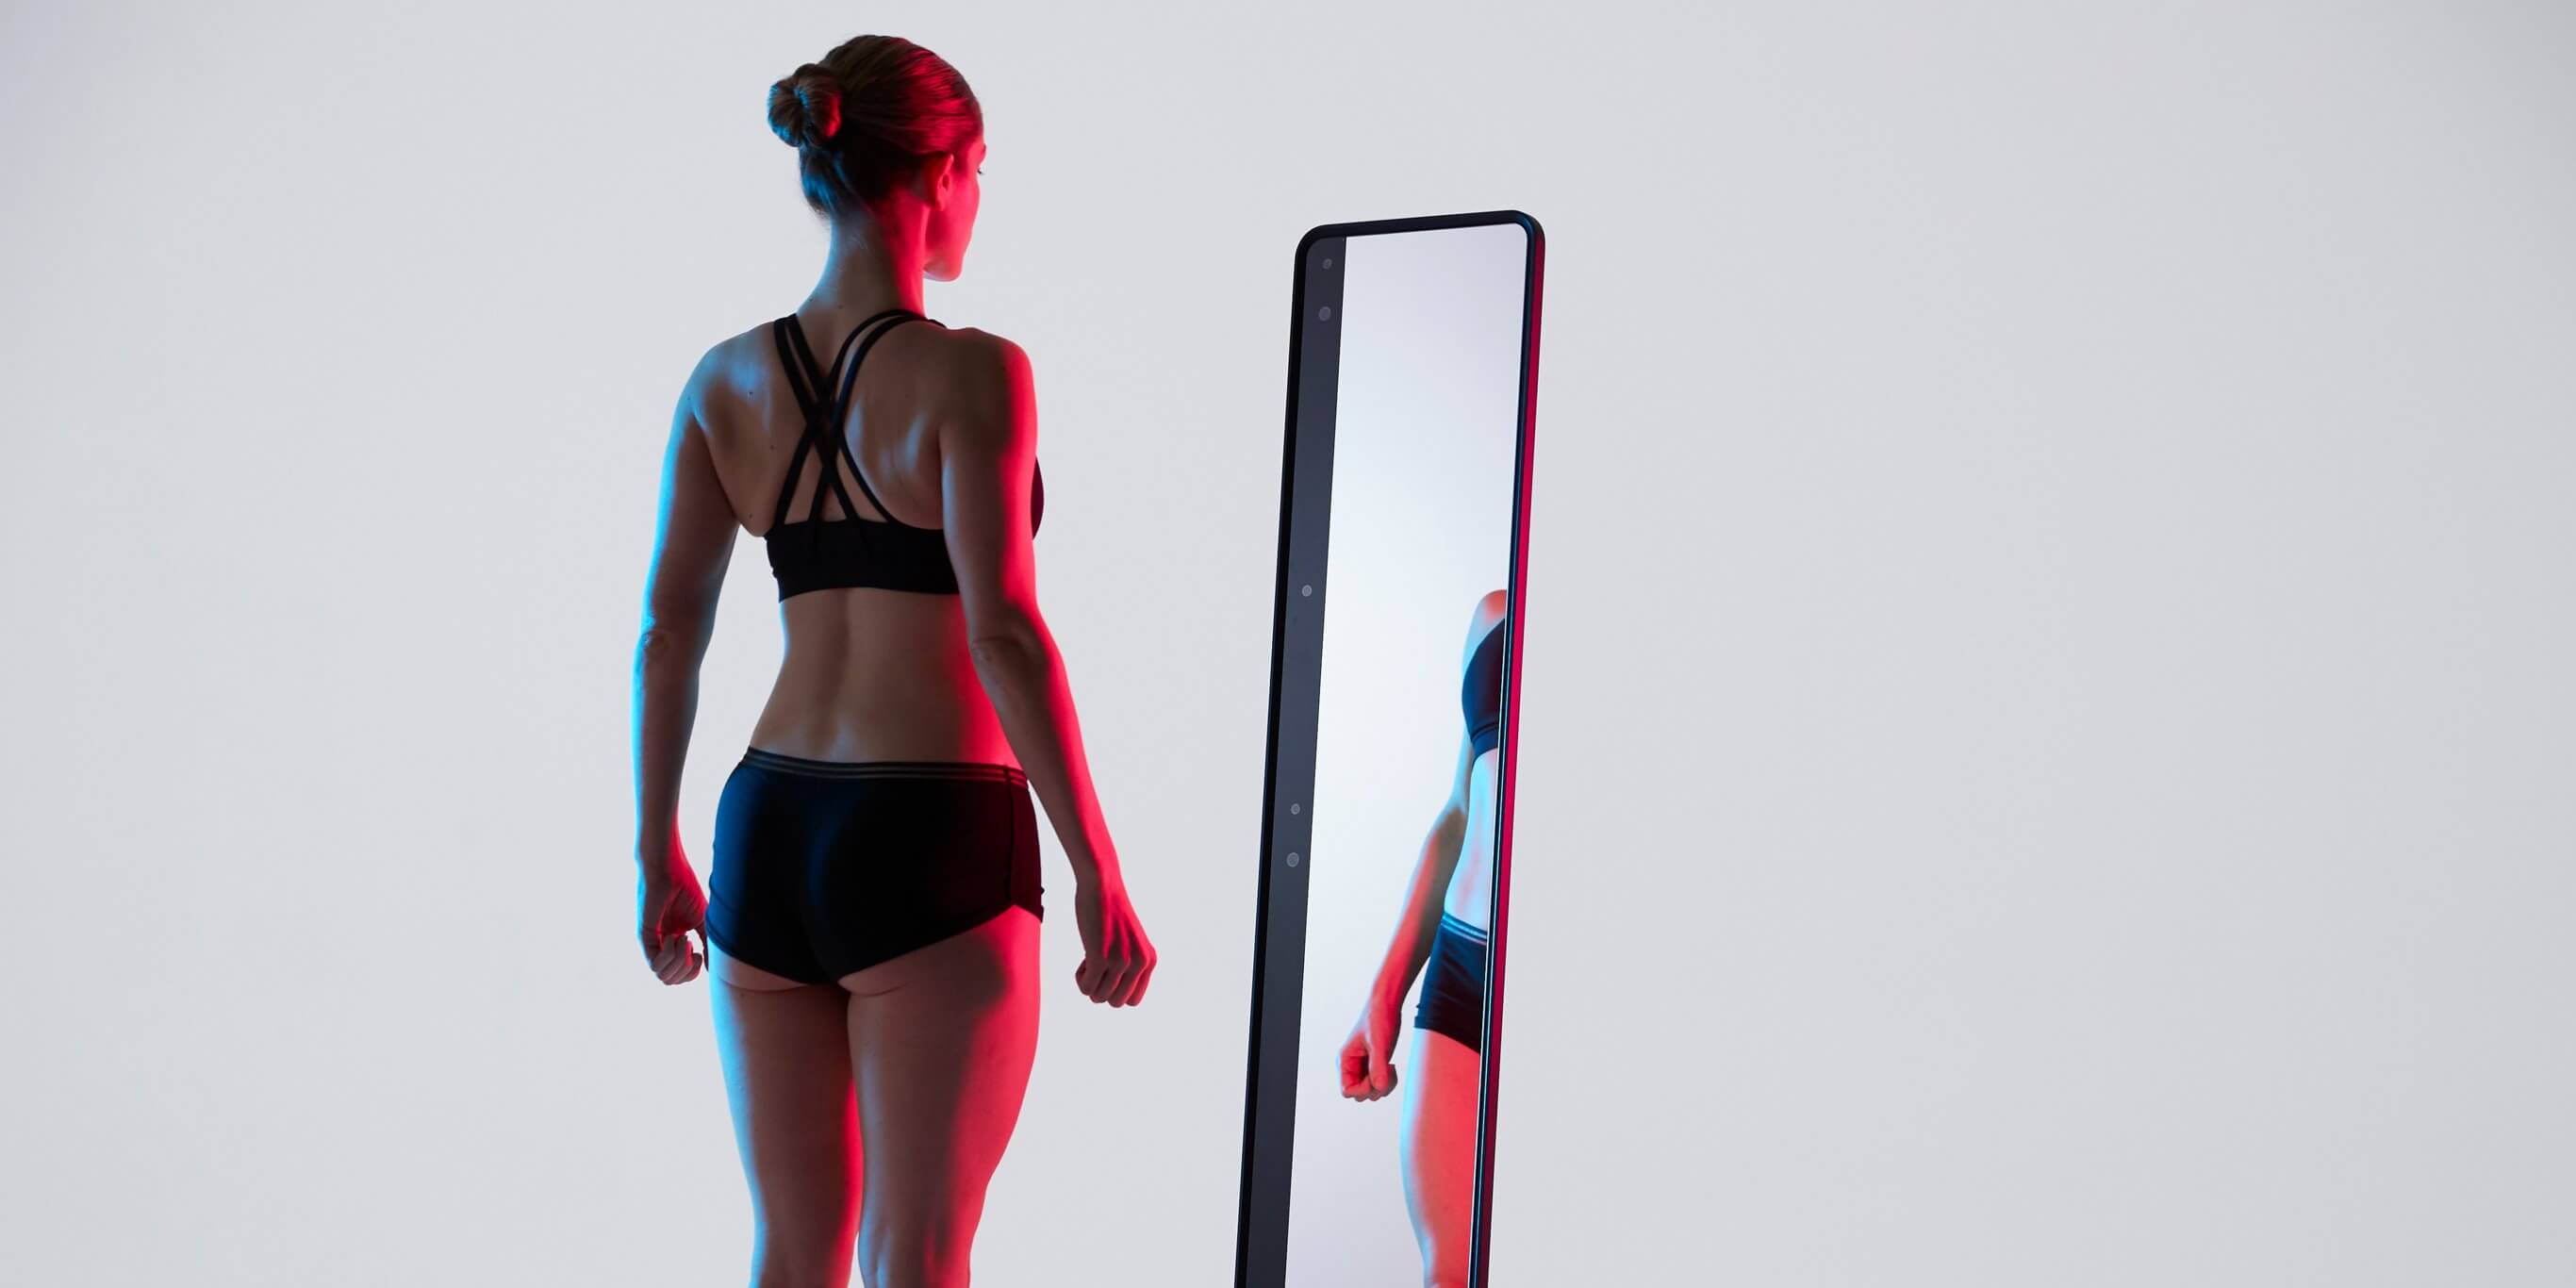 Naked Labs has released a mirror that shows all the hidden